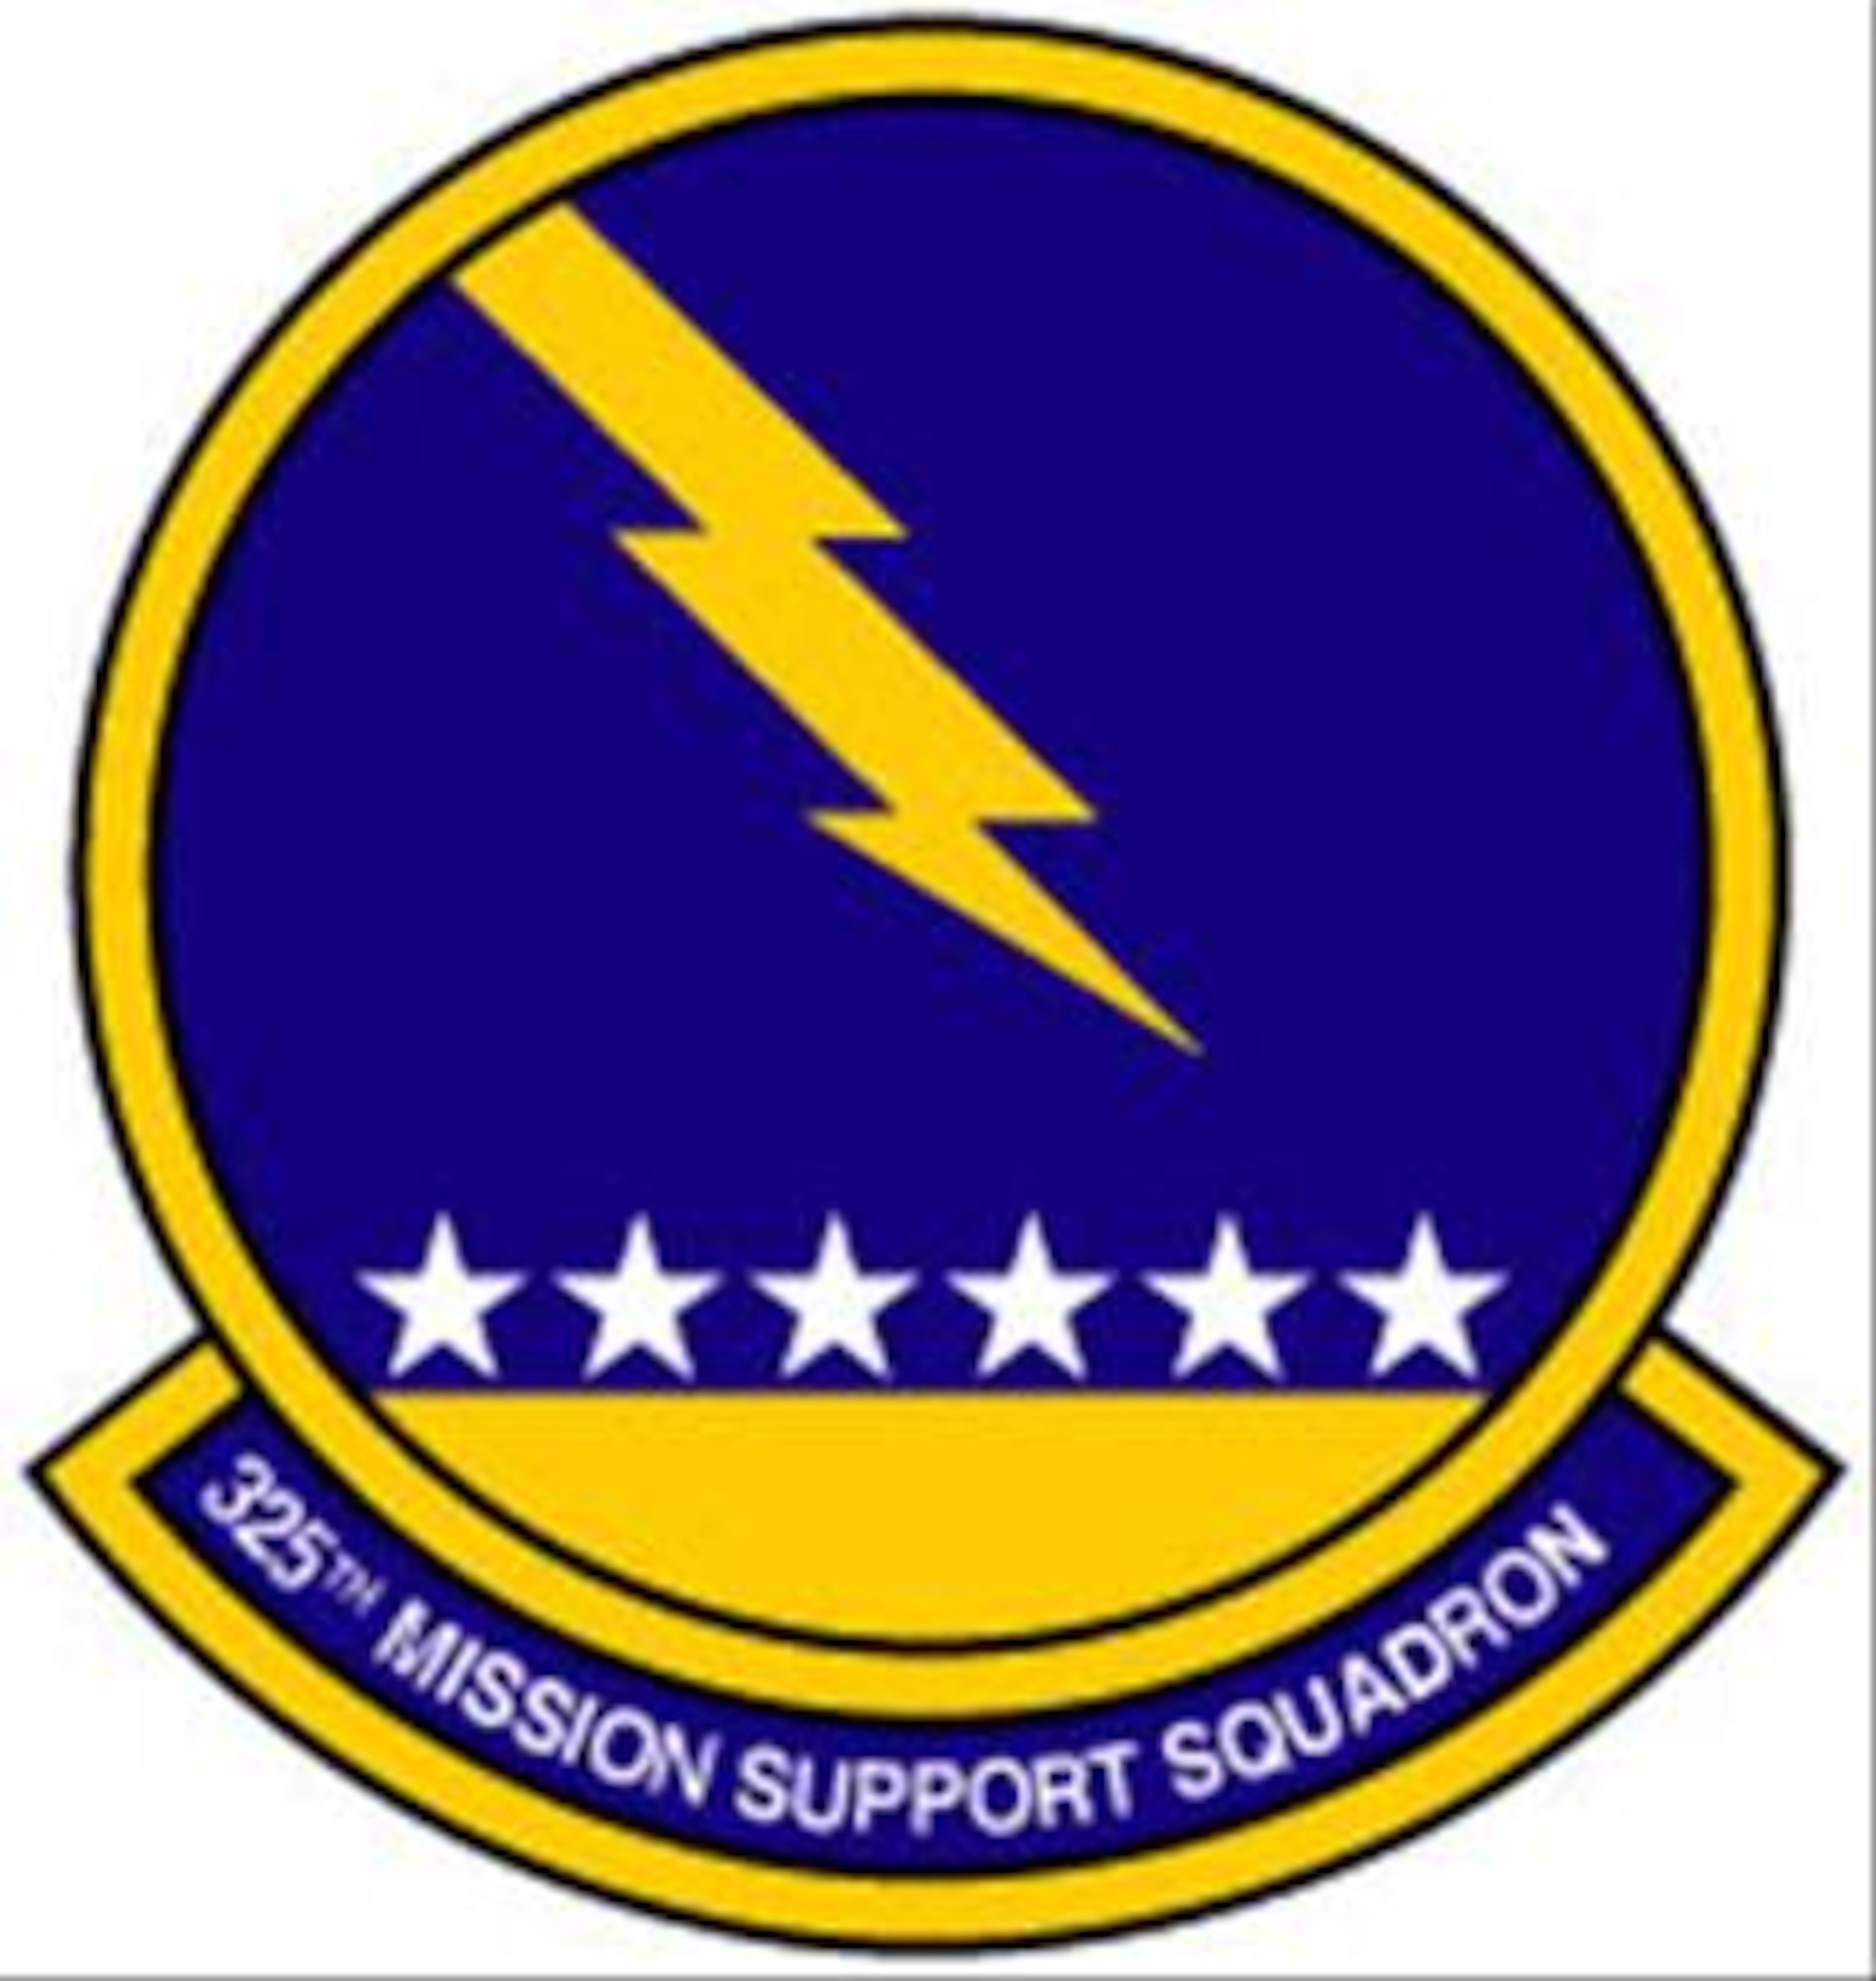 325th Mission Support Squadron